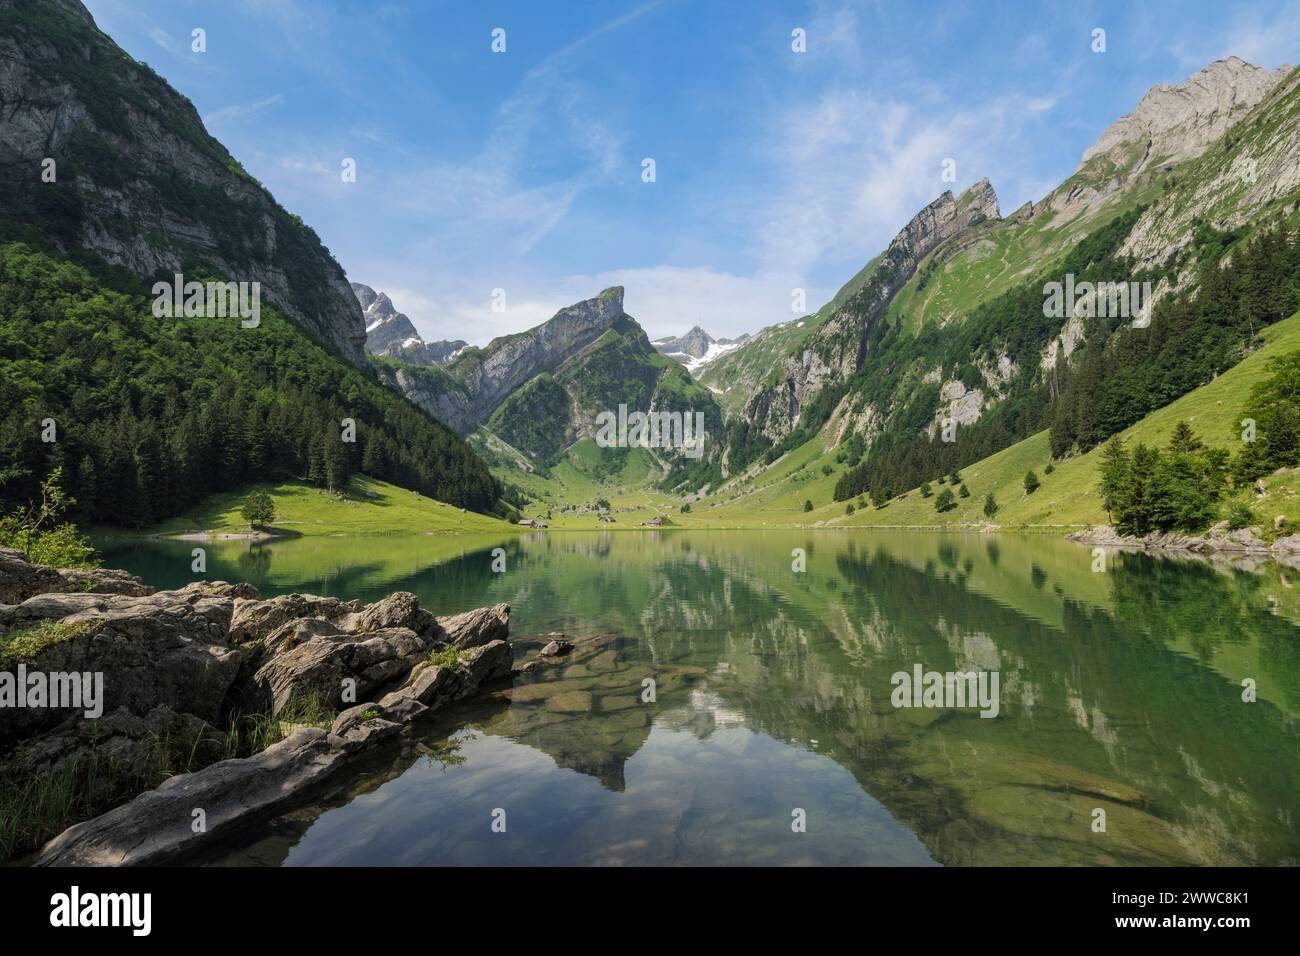 Switzerland, Appenzell Innerrhoden, Scenic view of Seealpsee lake in Appenzell Alps Stock Photo